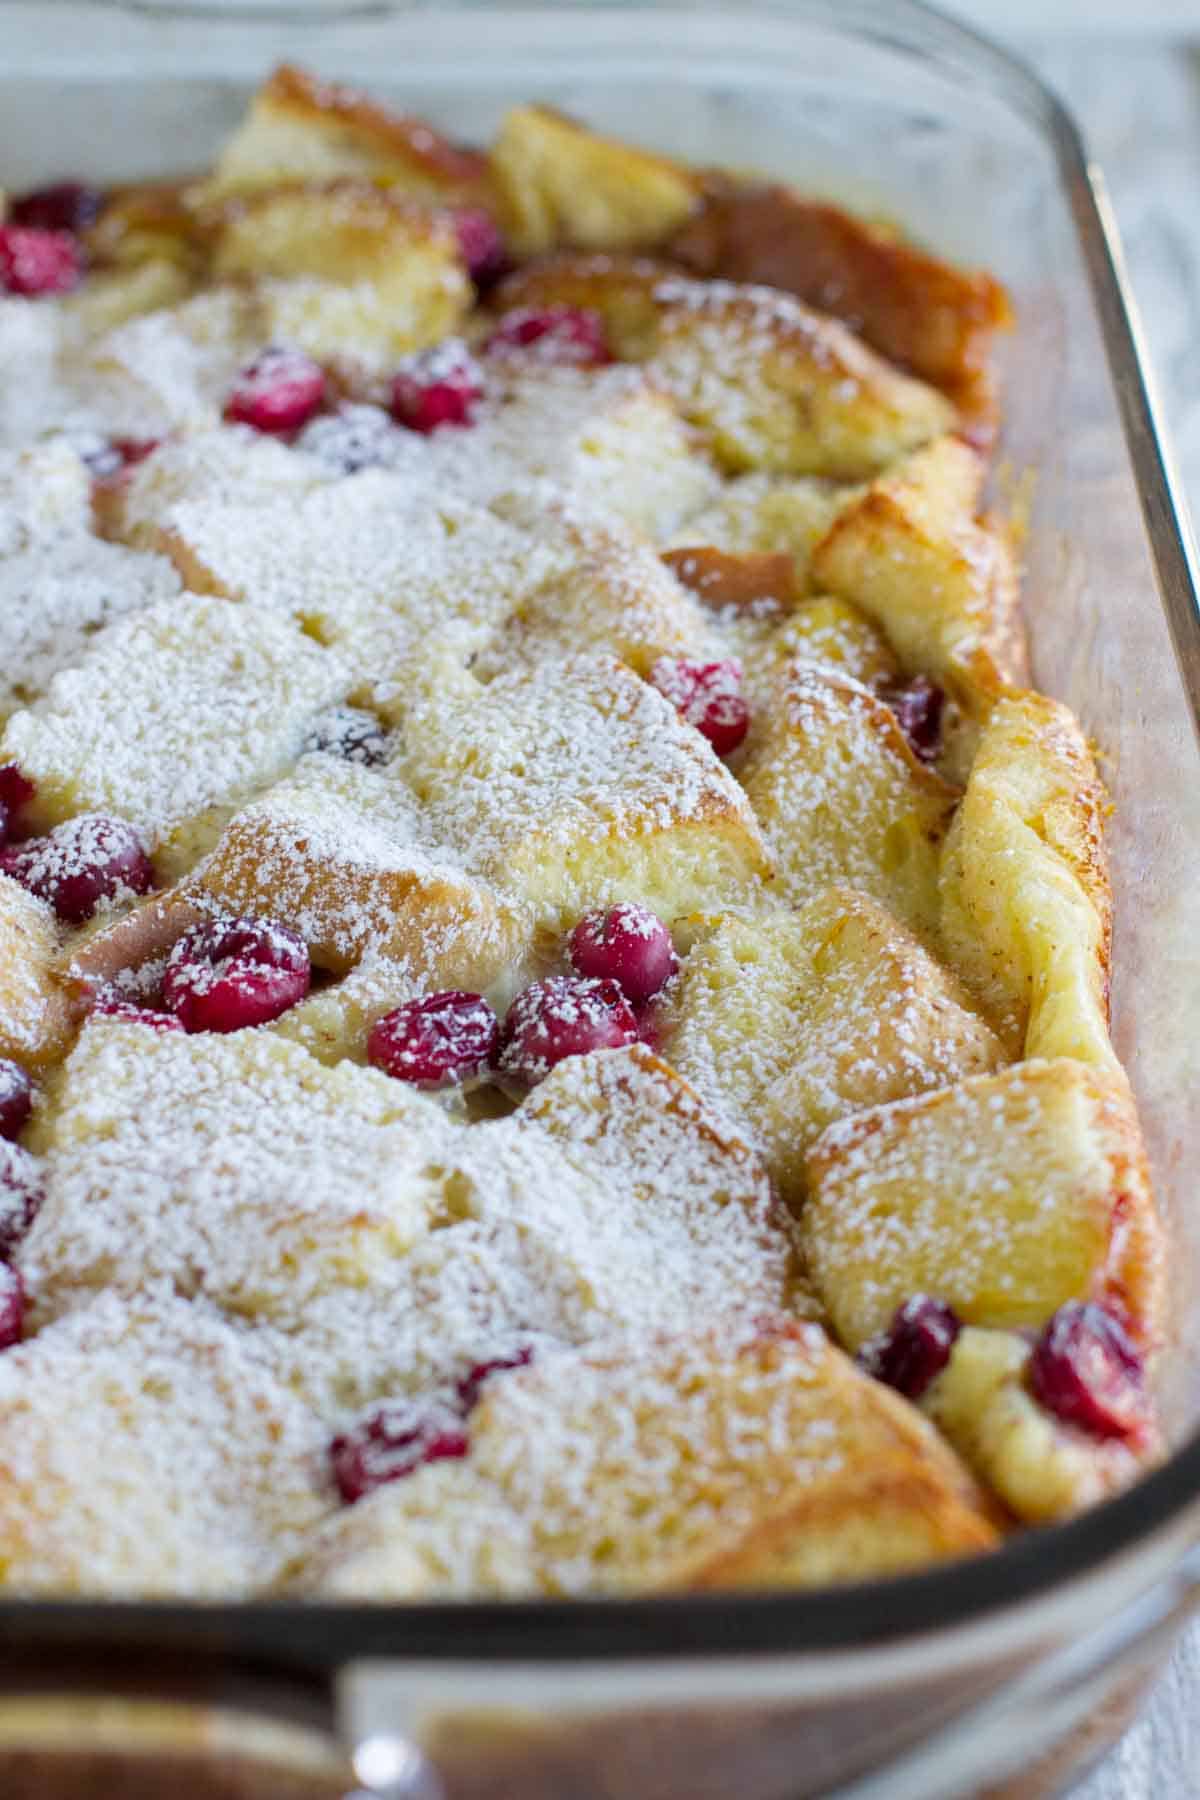 Cranberry orange baked French toast casserole in a baking dish topped with powdered sugar.